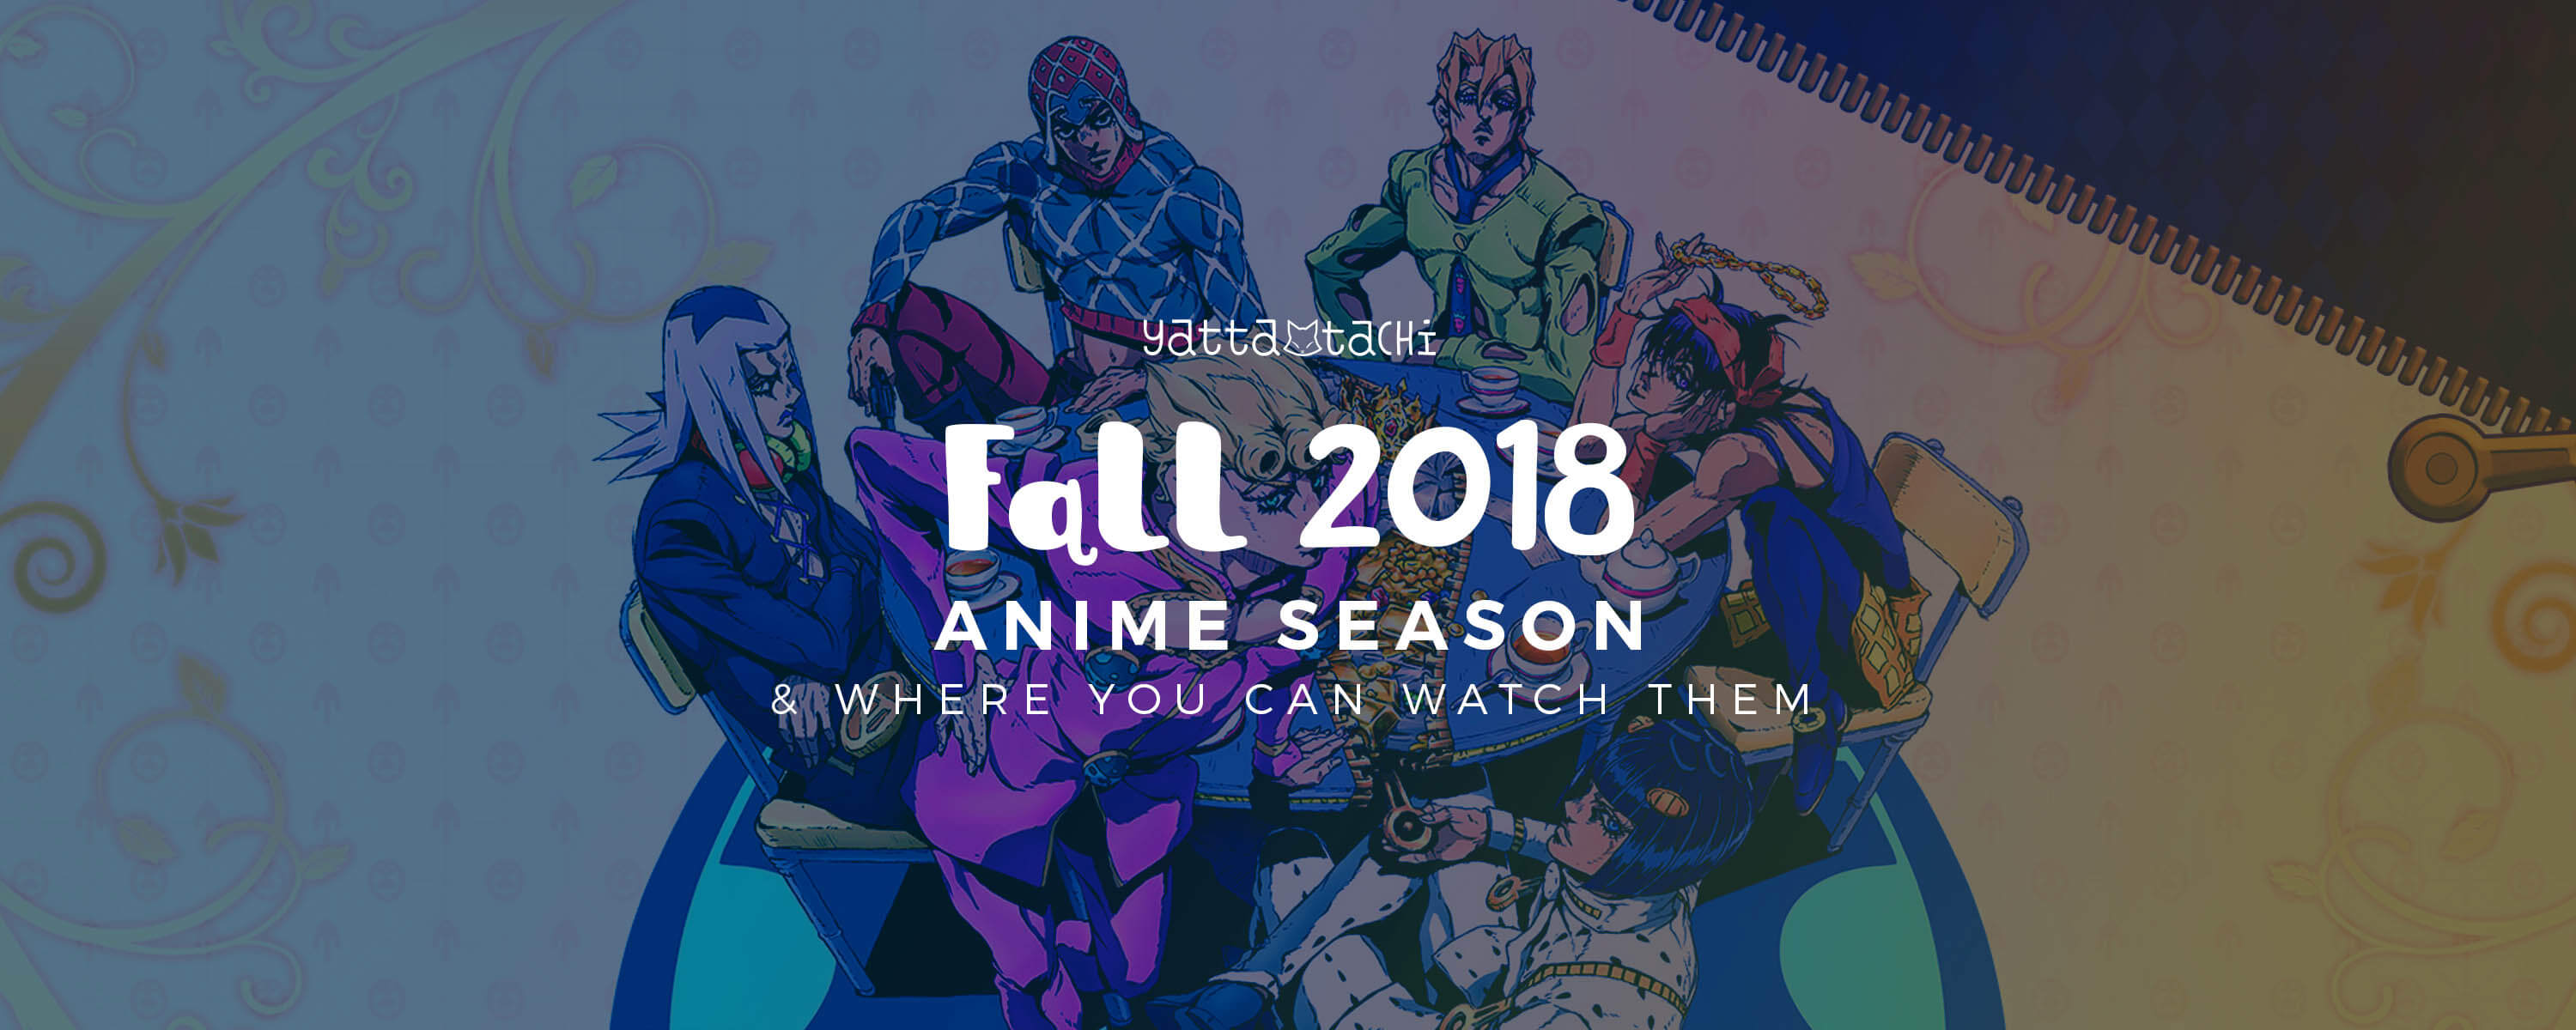 Where Can You Watch the Run with the Wind Anime Online? HIDIVE